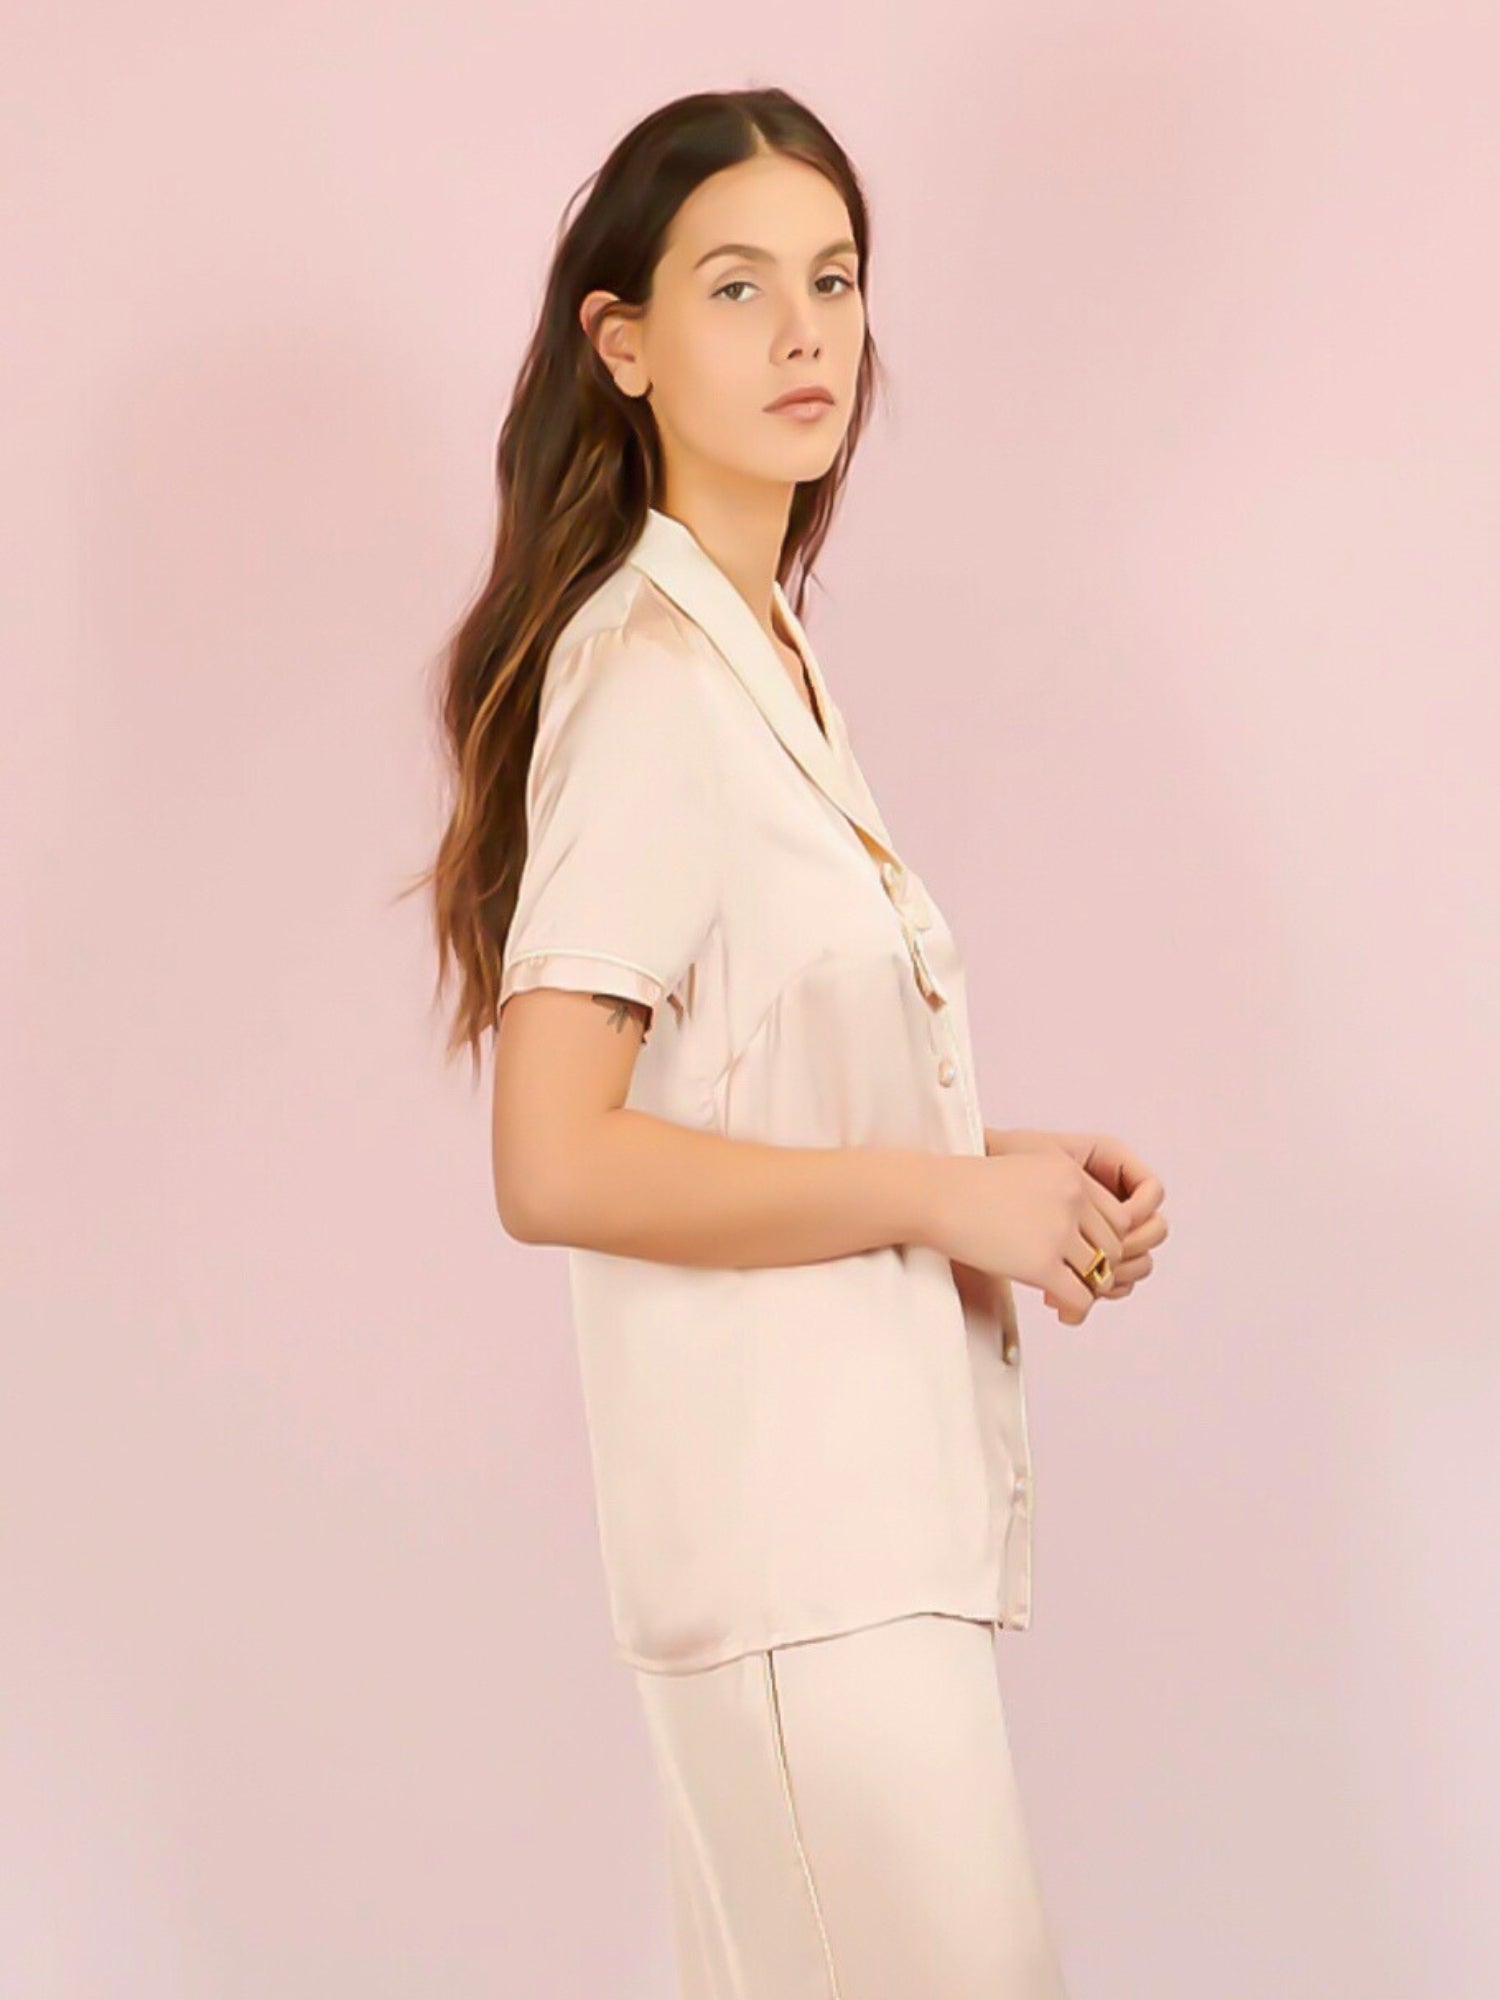 Perla Pyjama Top, Tops, Sister Jane - Ivory Sheep Collection Limited